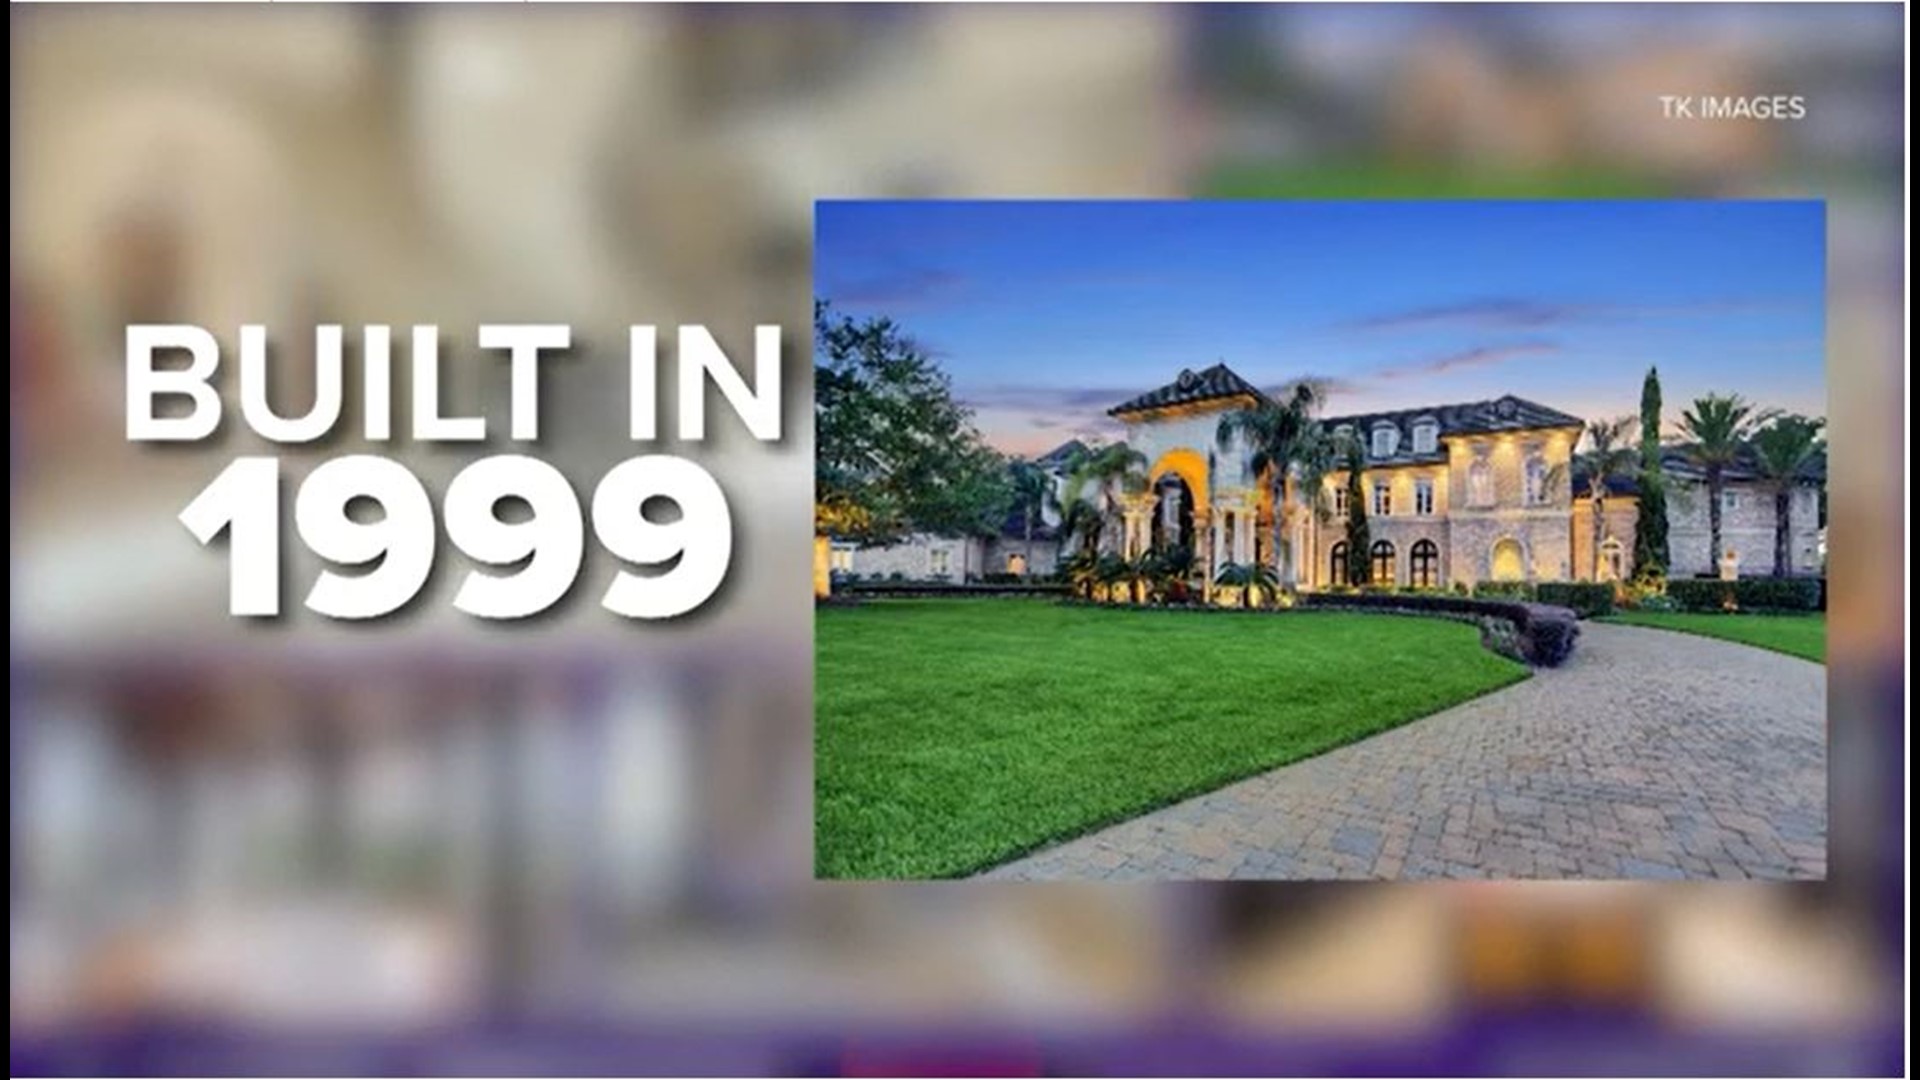 The then-Rocket paid $6.3 million when he bought the 23,000-square-foot Sugar Land home back in 2004.